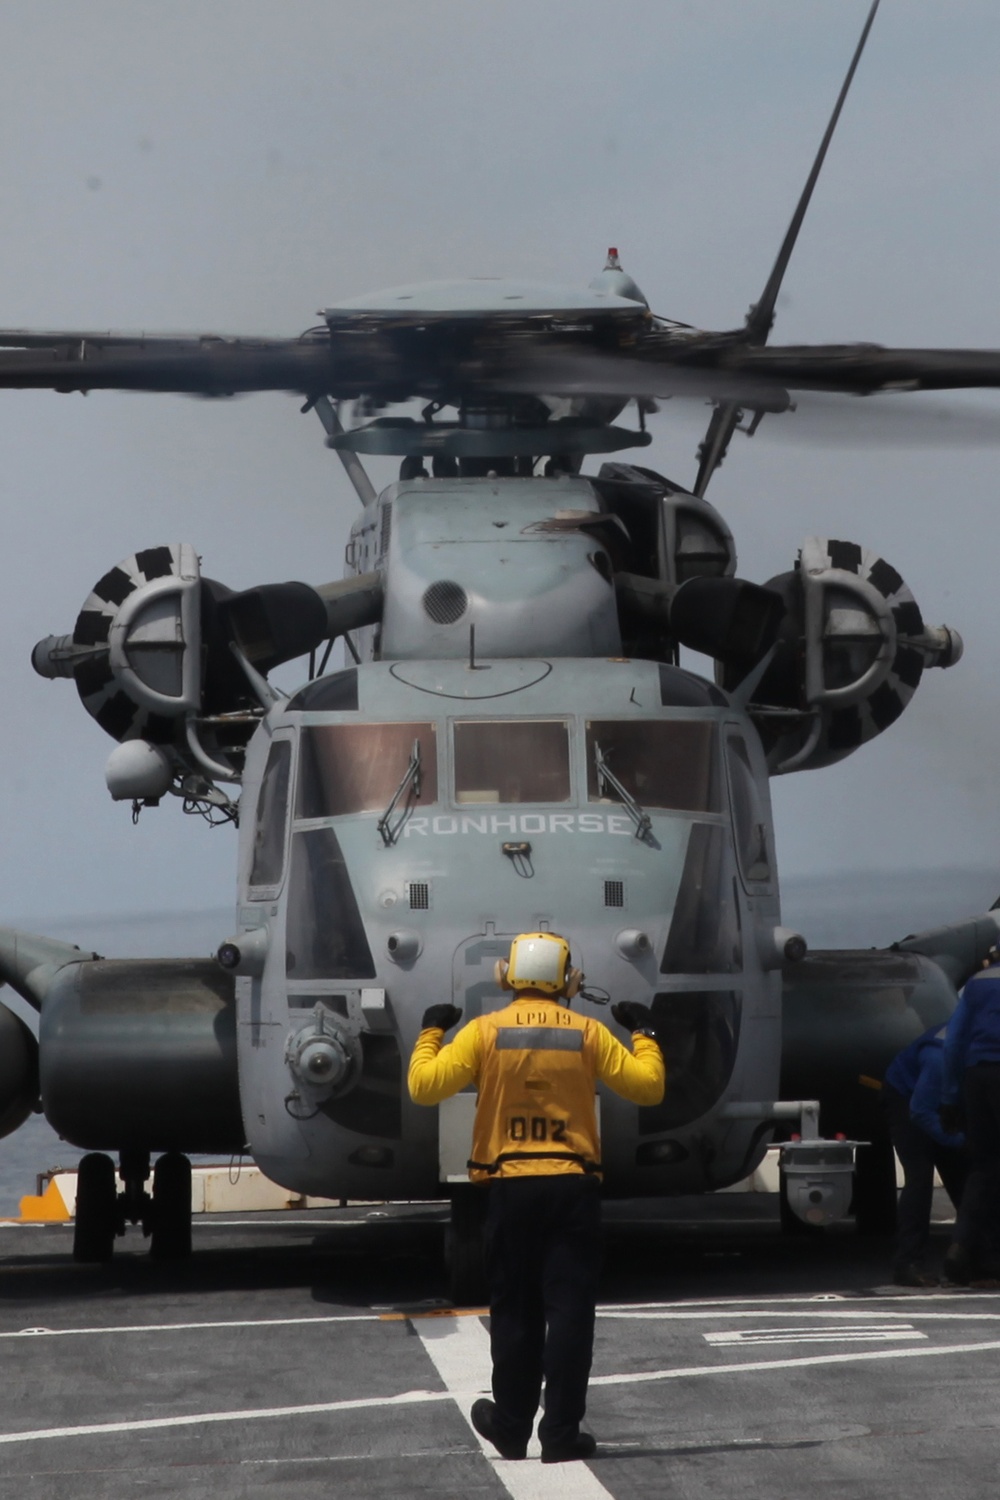 24th Marine Expeditionary Unit, USS Mesa Verde team up for Haiti disaster relief